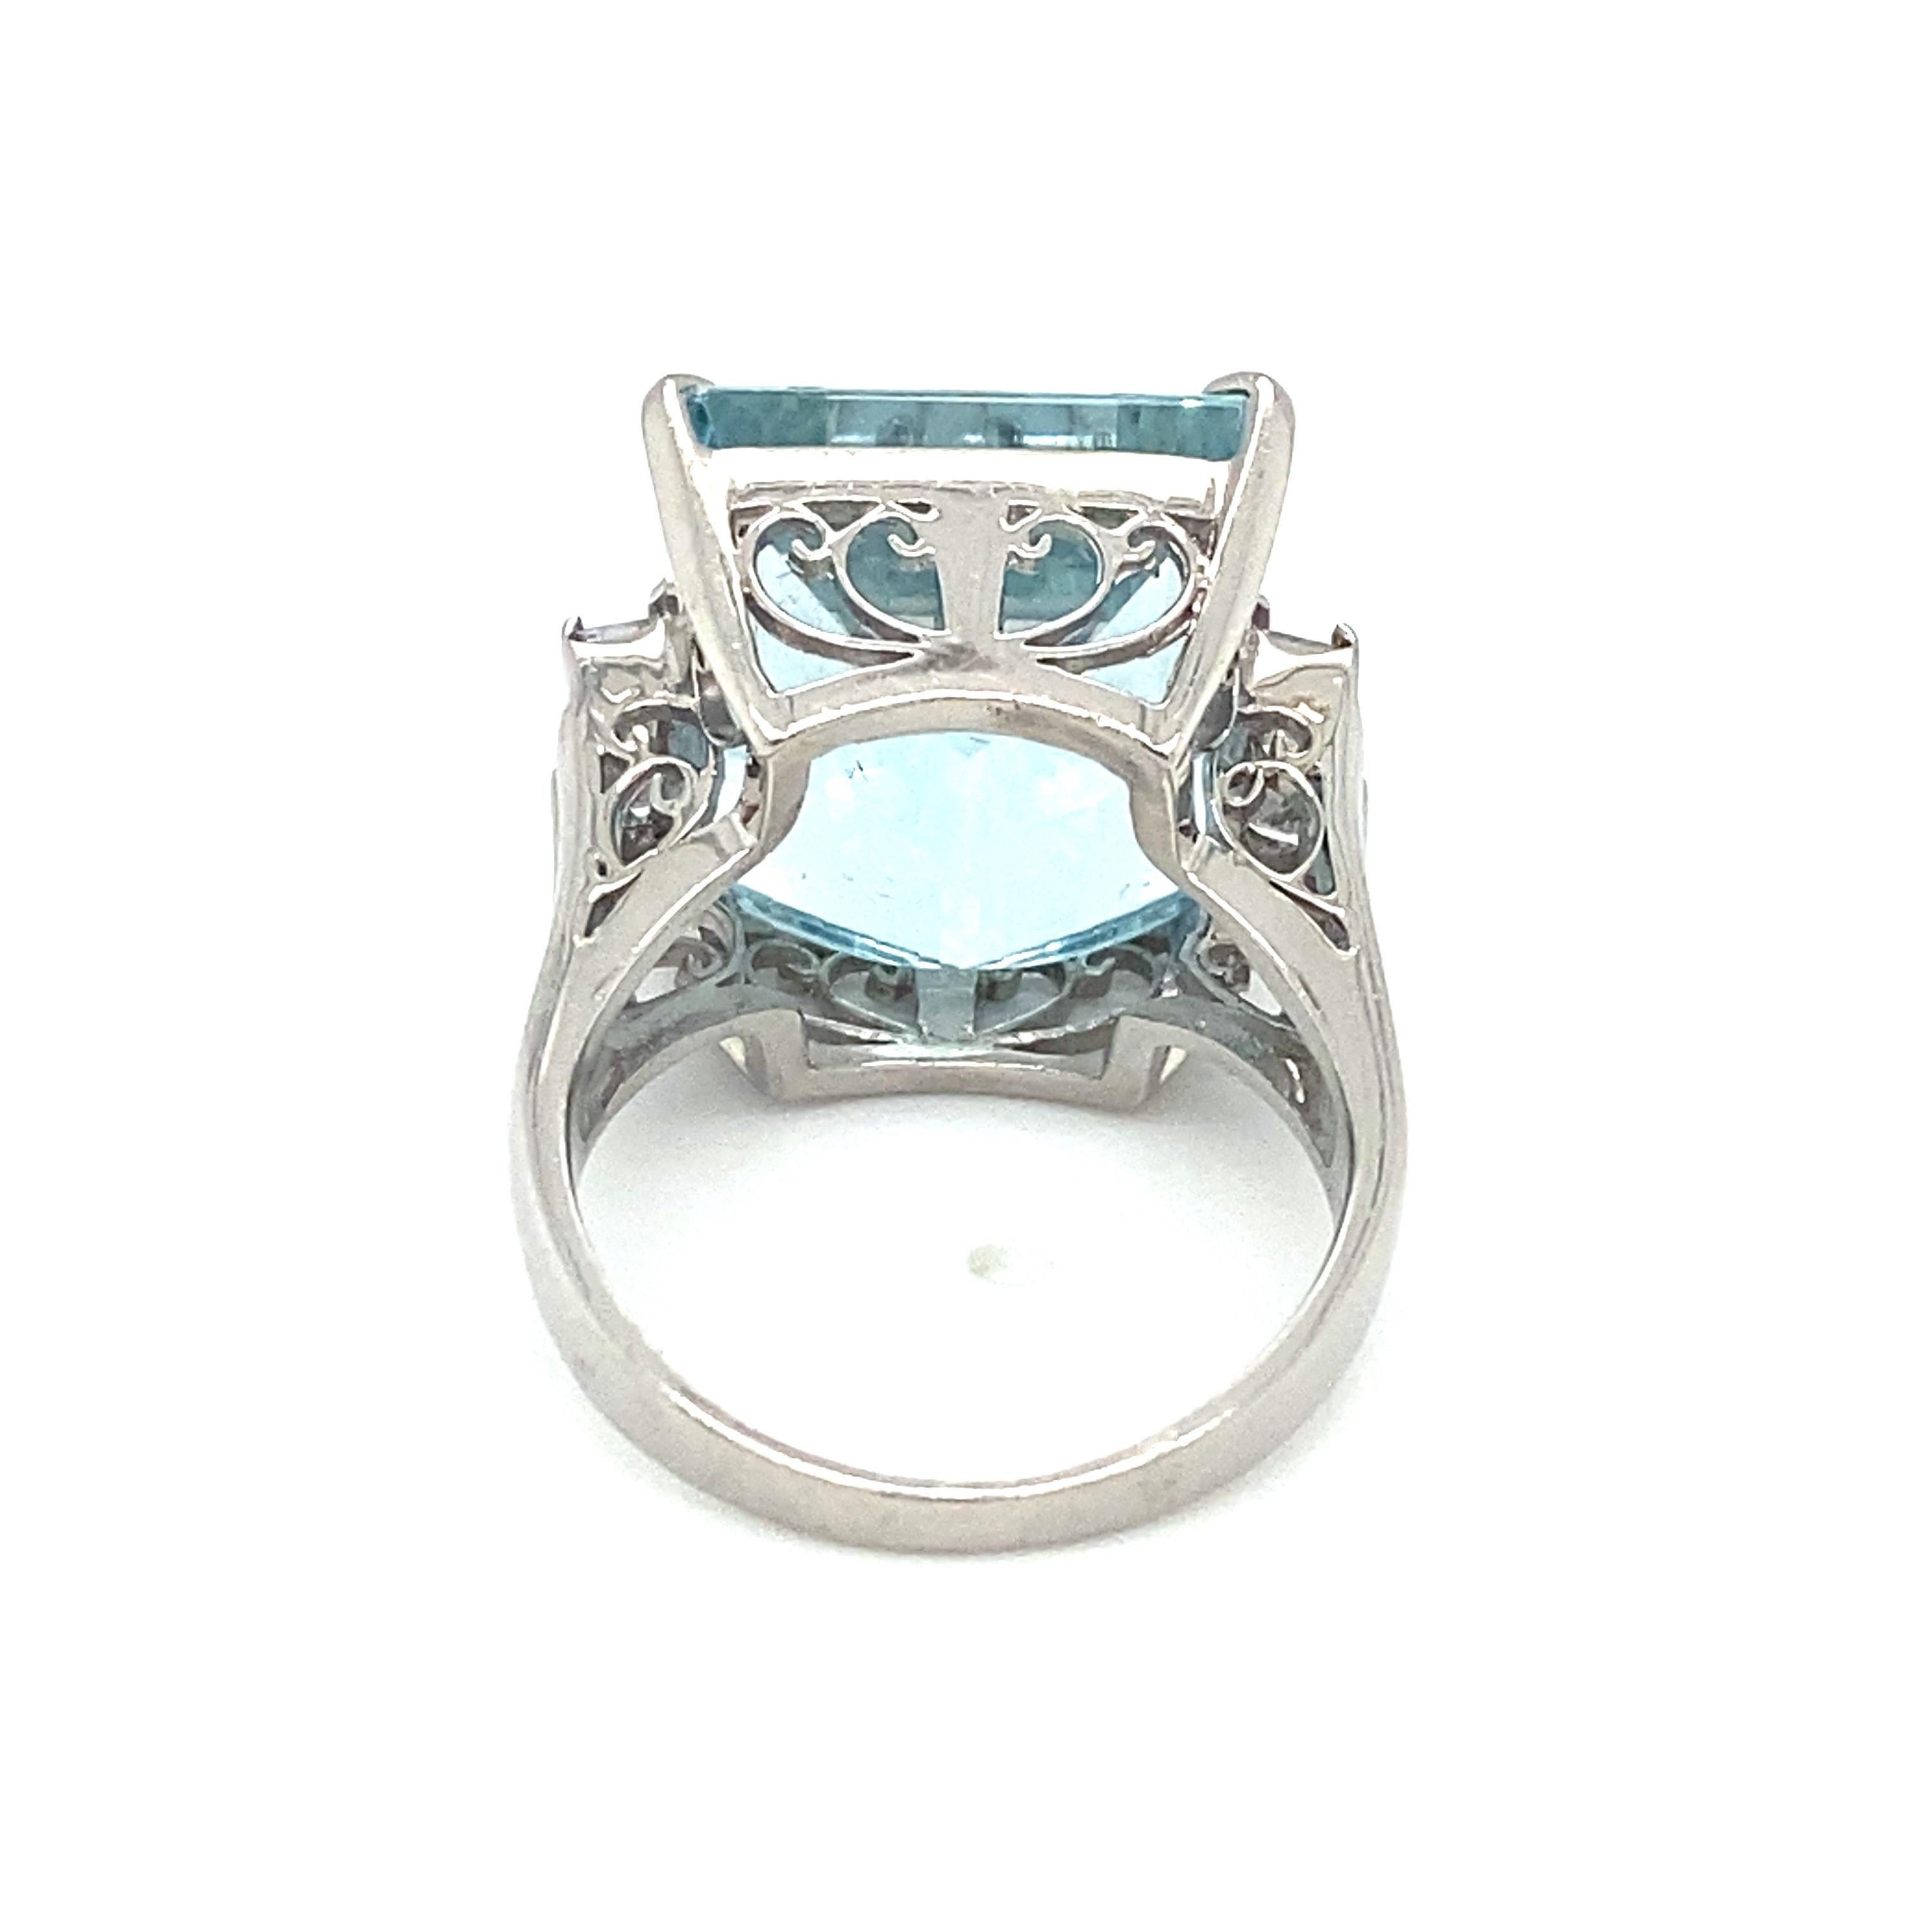 Item Details: This stunning ring has a large square aquamarine with accent side diamonds, set in platinum. It dates back to the 1960s and features Asscher cut accent diamonds. It has a very rich and ornate look! The gallery design is intricate and